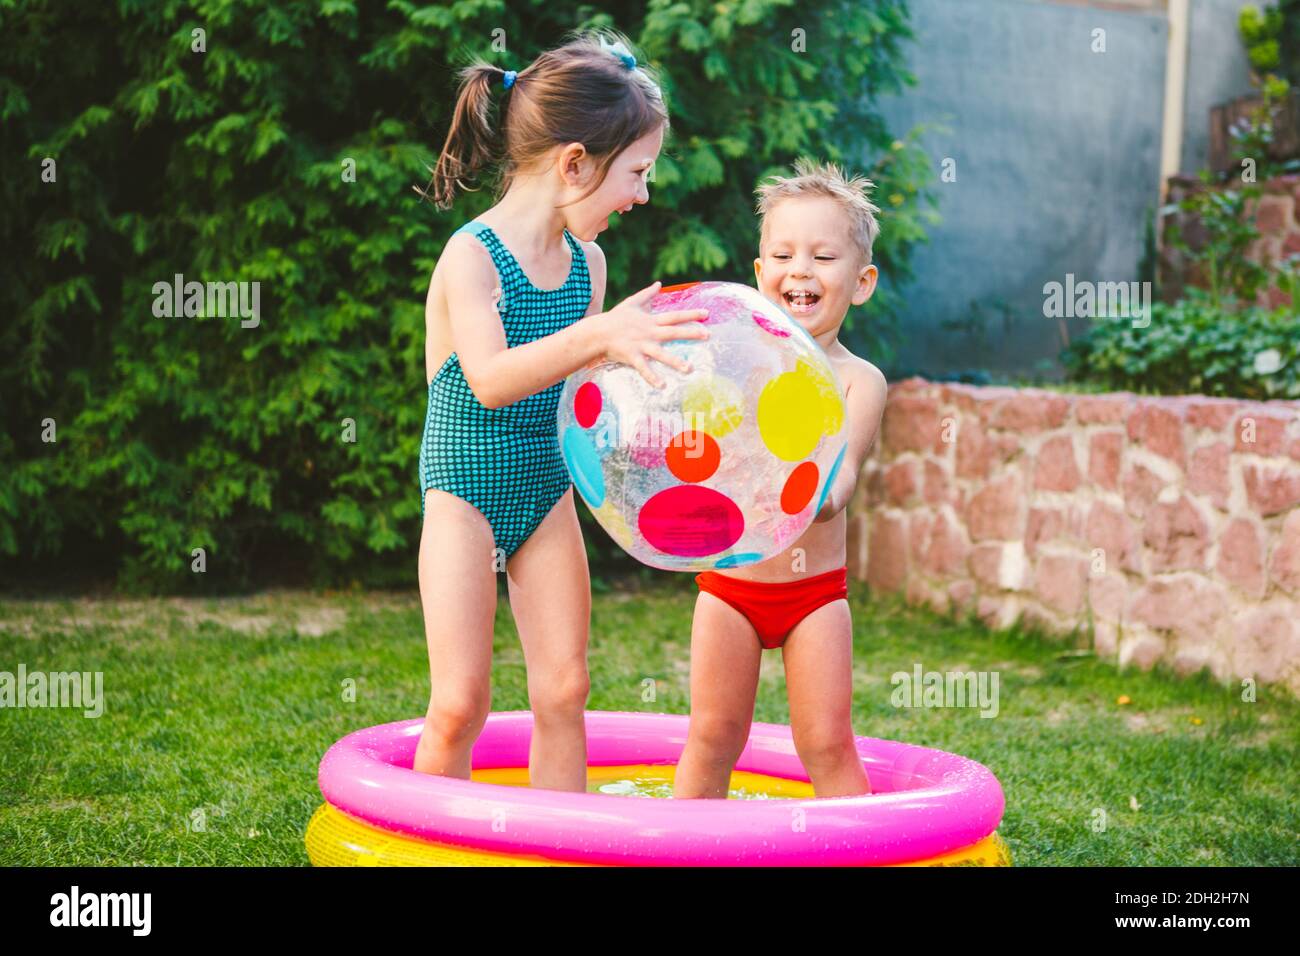 Funny Inflatable Ball Kids Beach Pool Play Toy Ball Children Outdoor Toy 